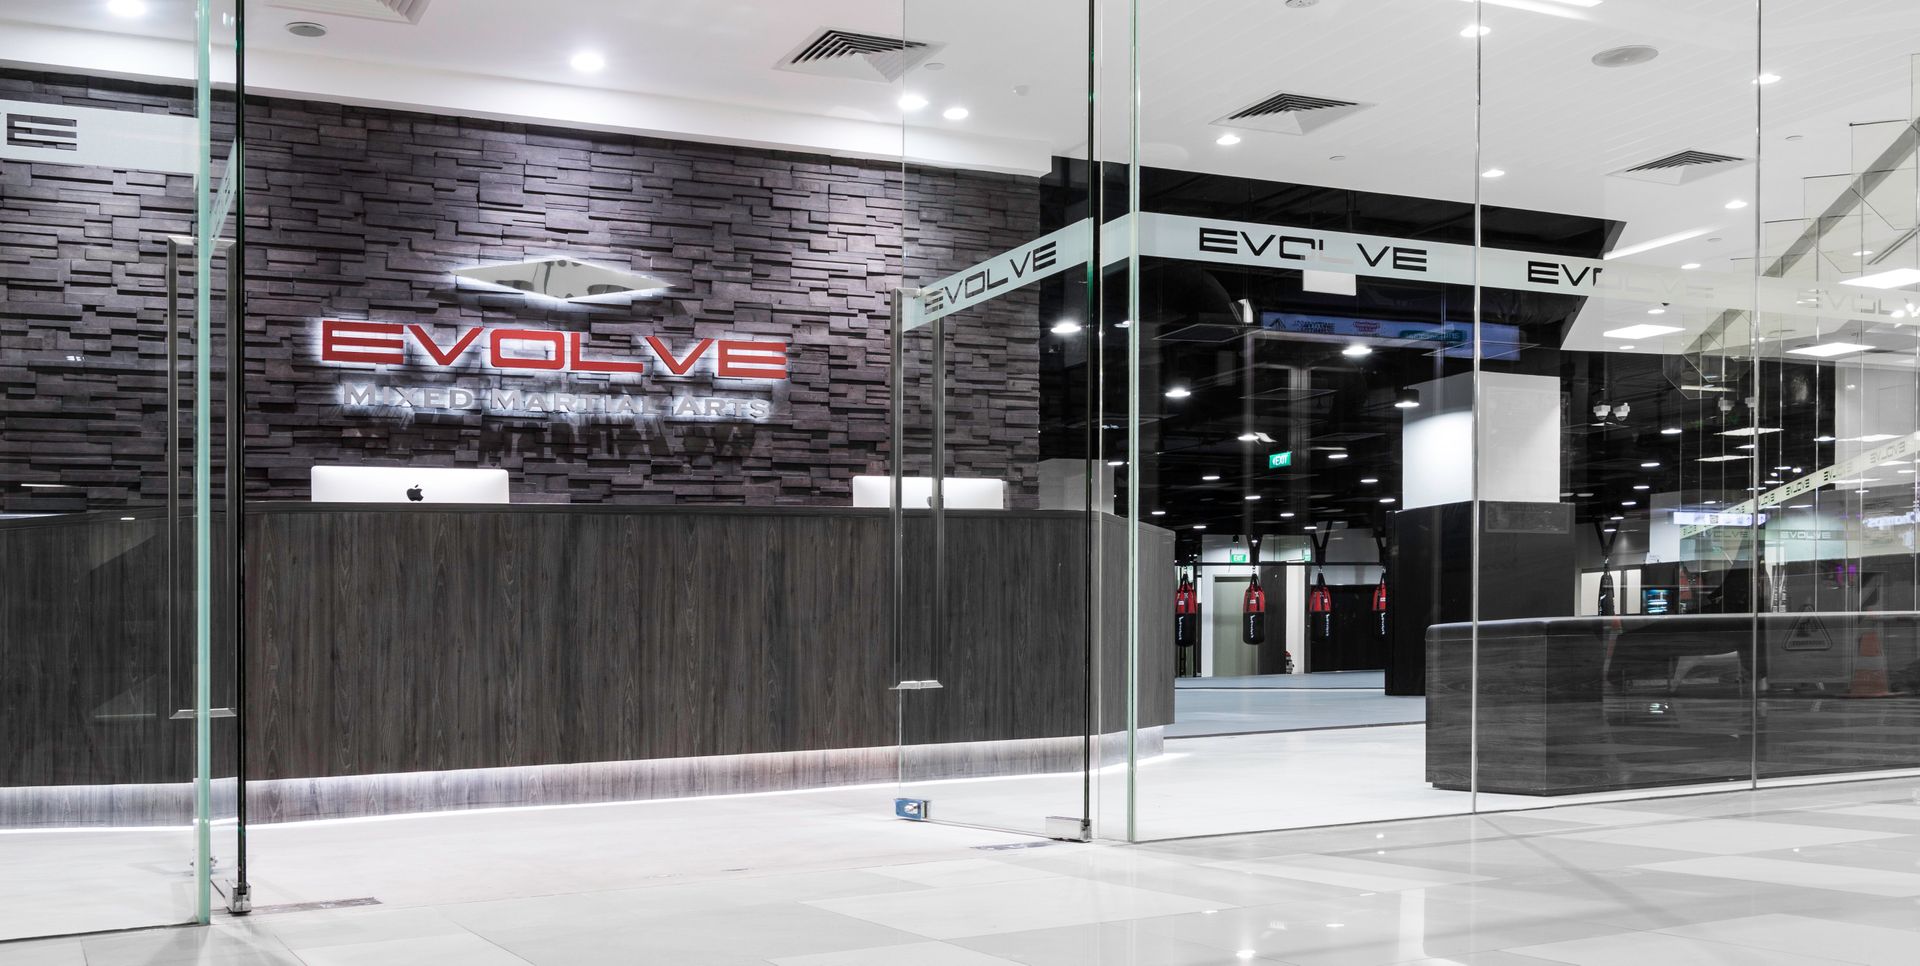 evolve mma online booking